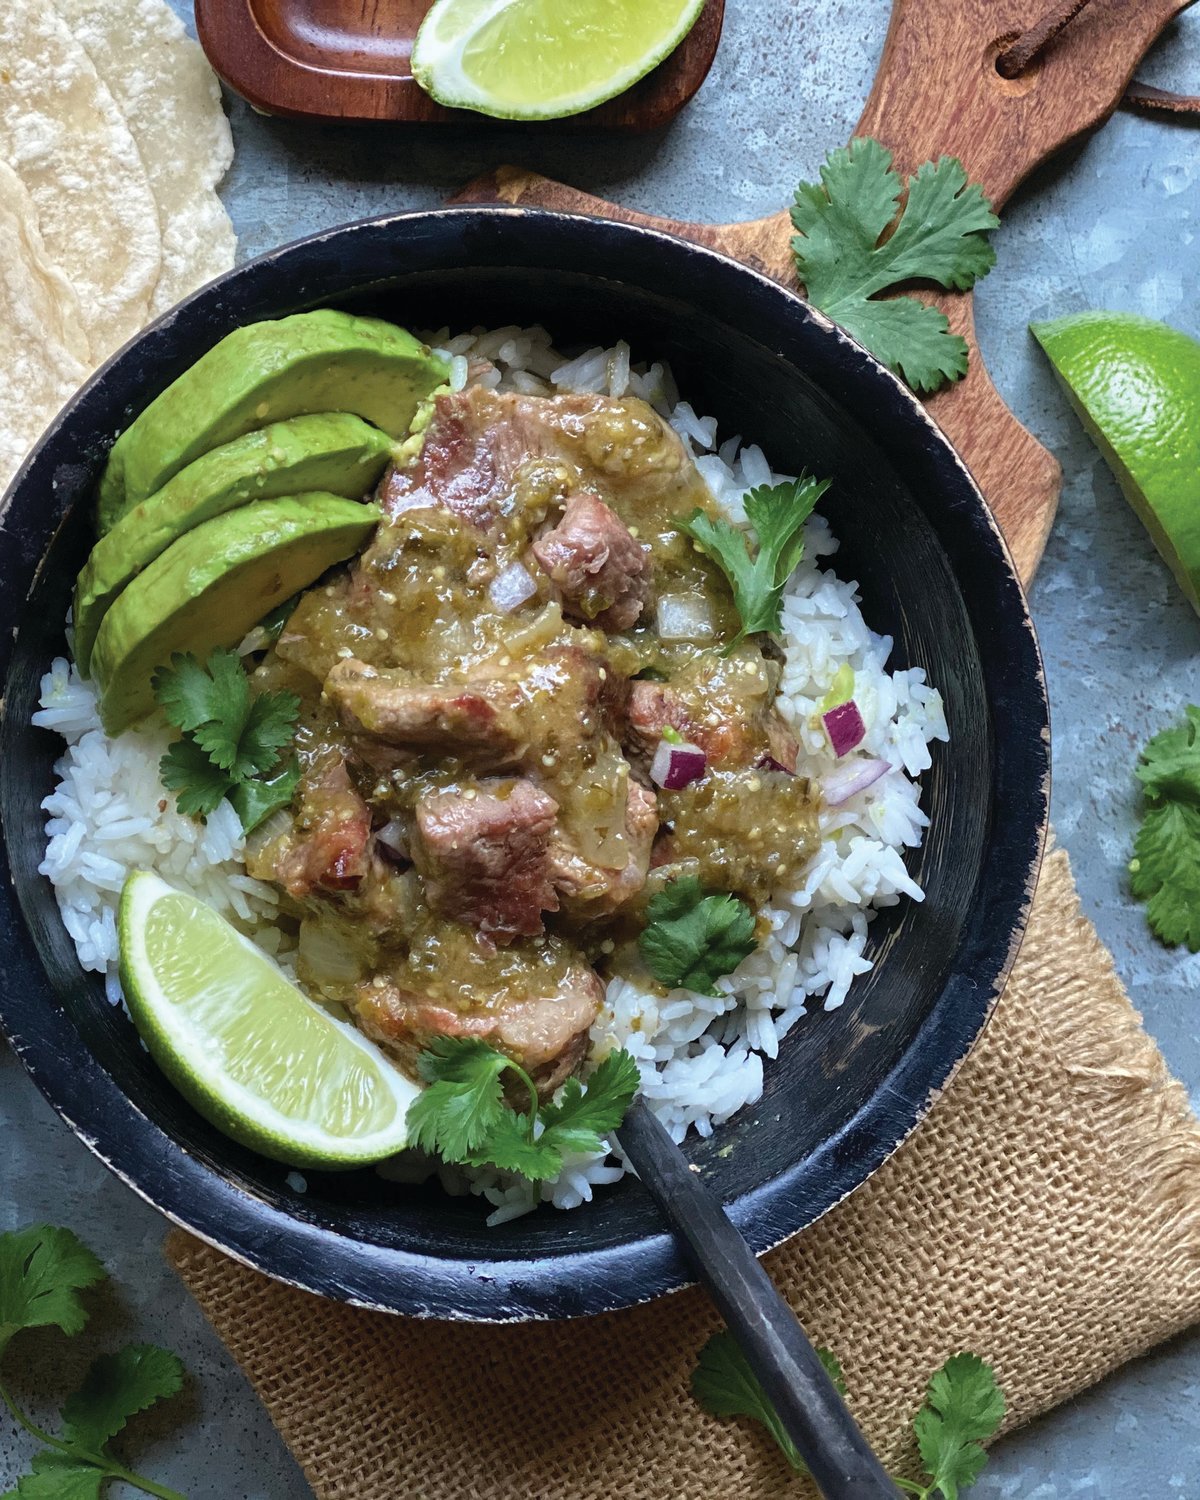 While this recipe focuses on pork, the beauty of a chile verde is that you can use the recipe as a template and substitute in your favorite meat for the pork.